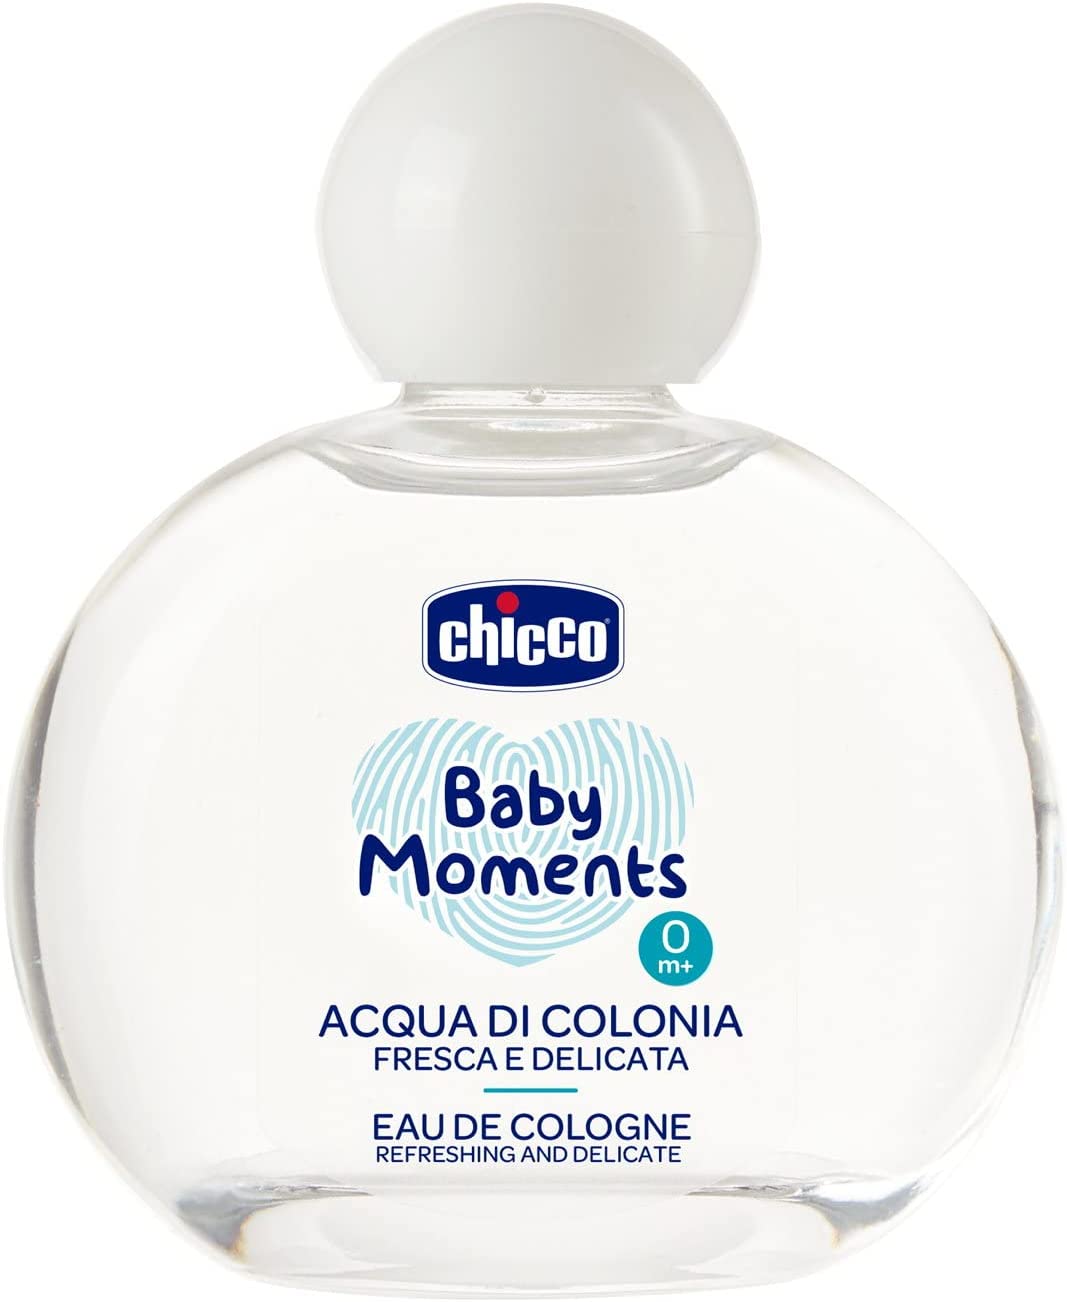 Chicco Baby Moments Eau De Cologne Refreshing and Delicate for Baby Skin 0M+ 100Ml, Multi Color